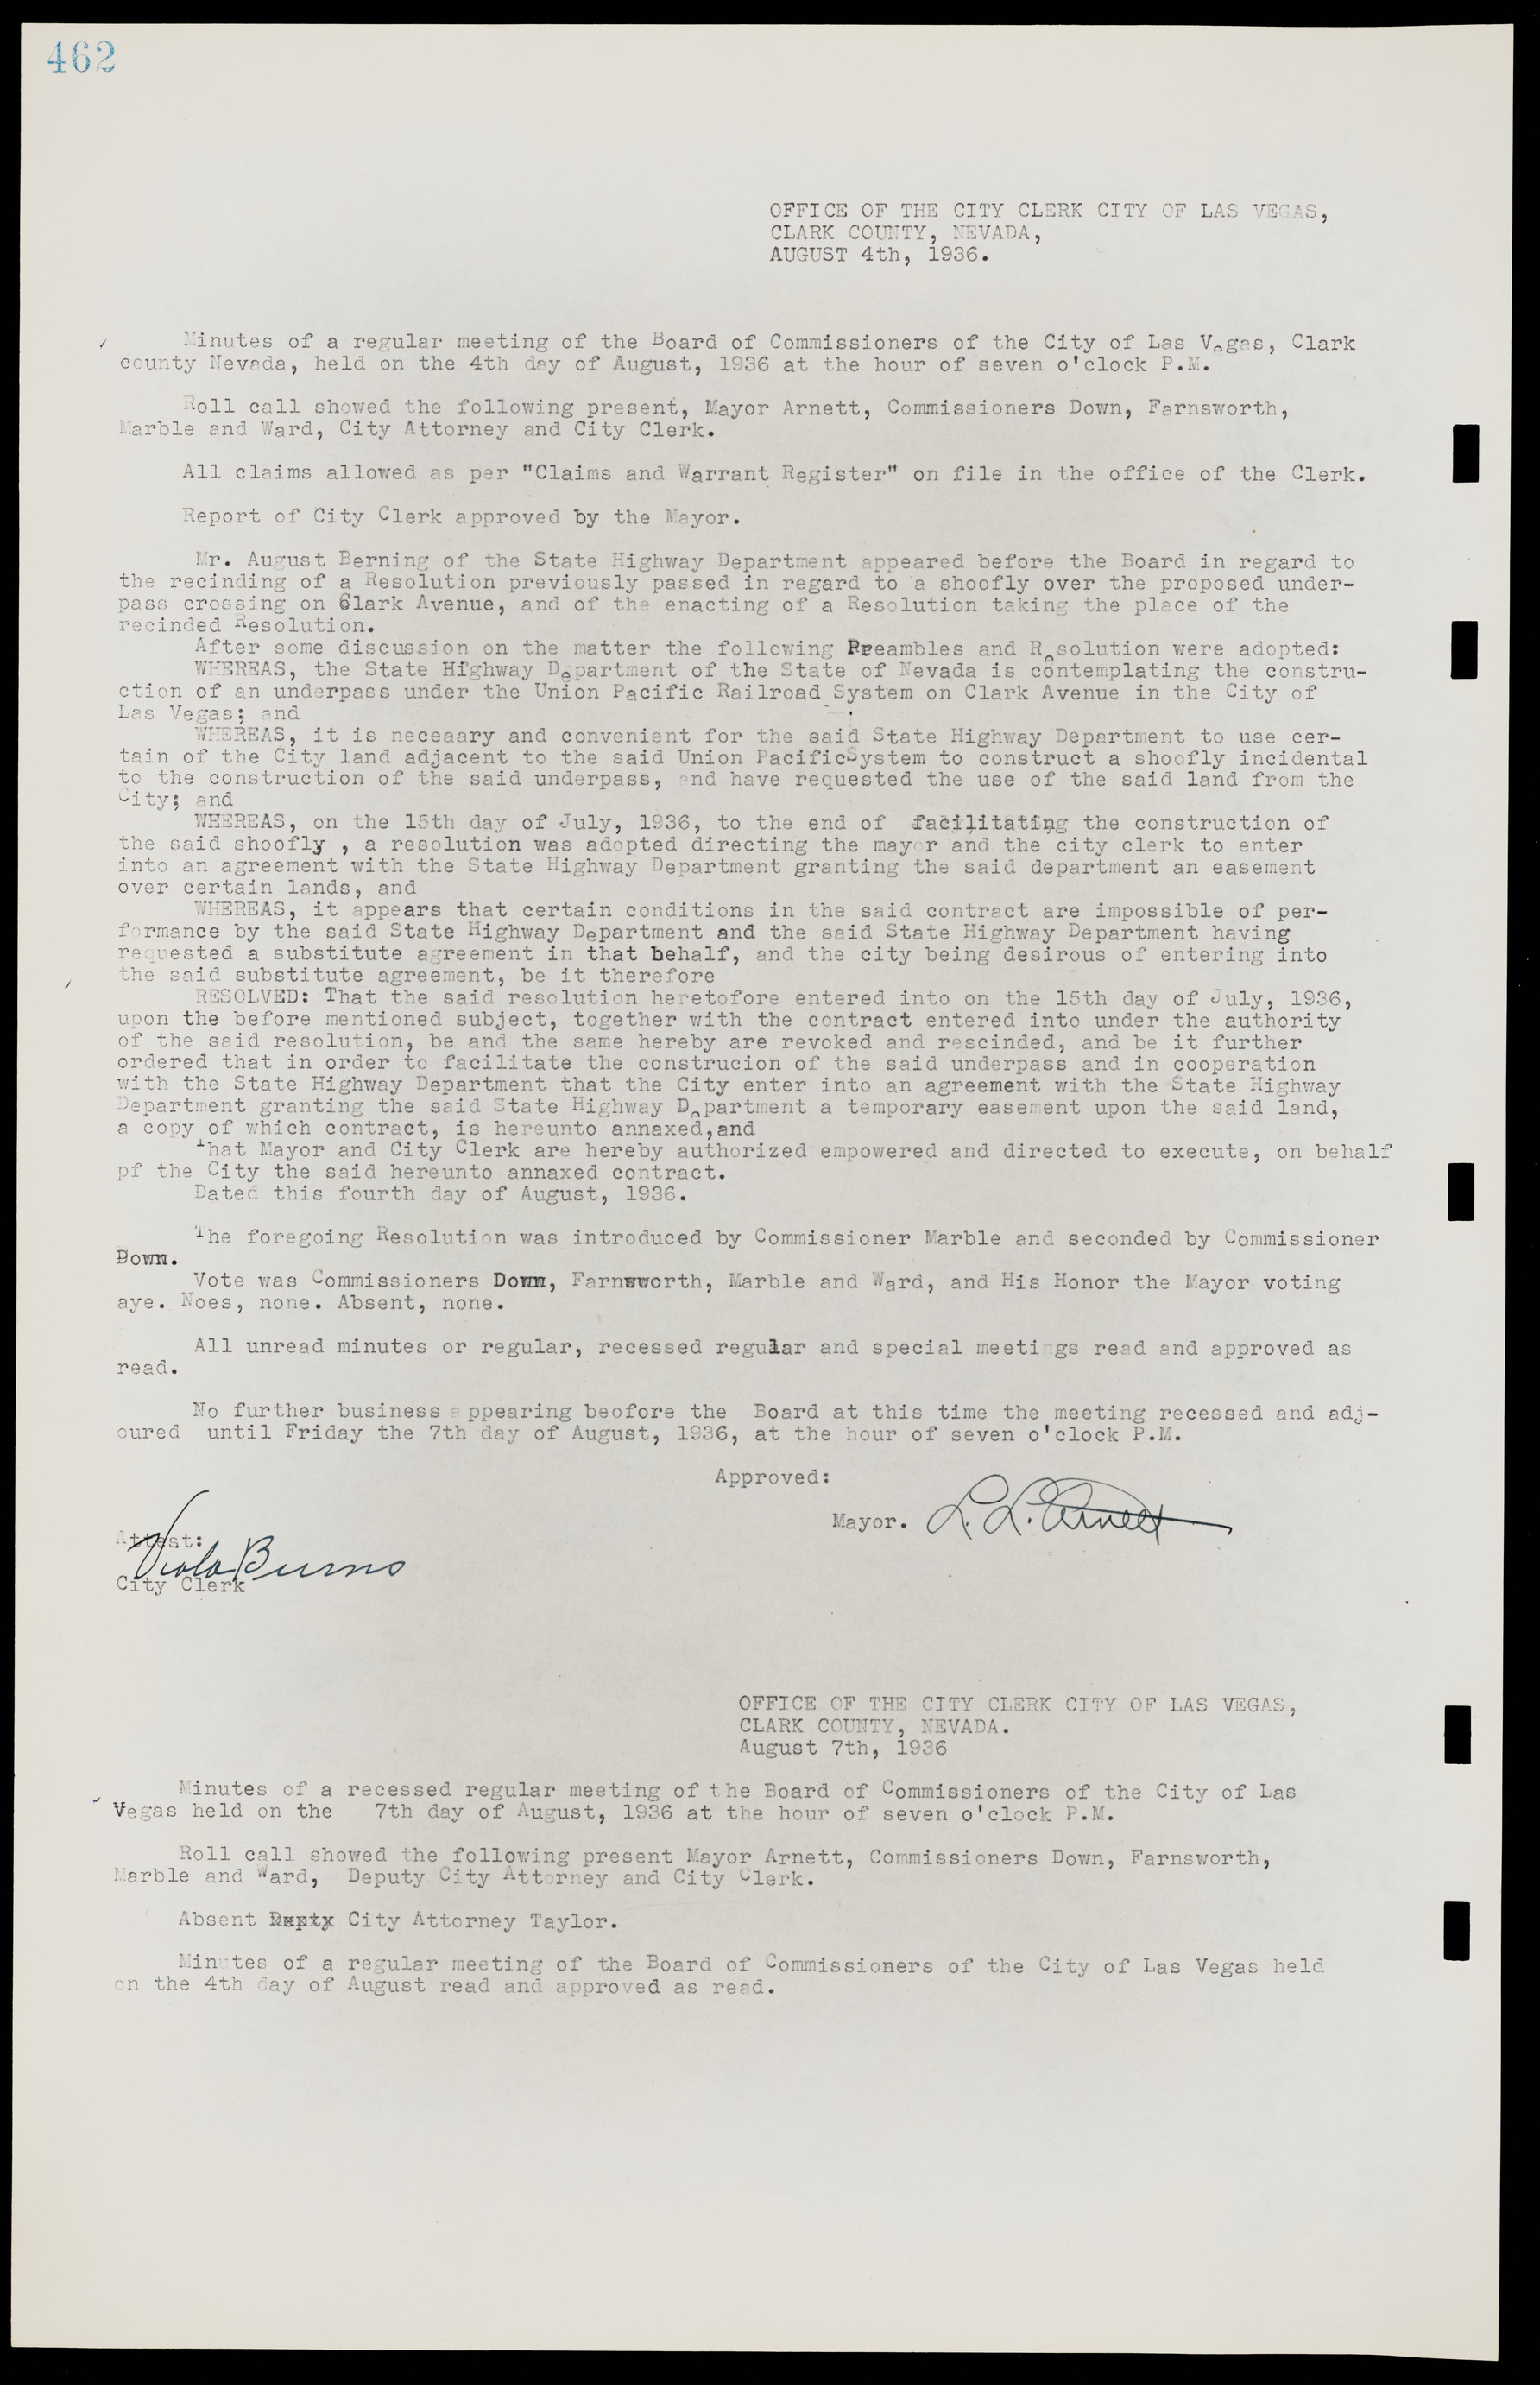 Las Vegas City Commission Minutes, May 14, 1929 to February 11, 1937, lvc000003-469